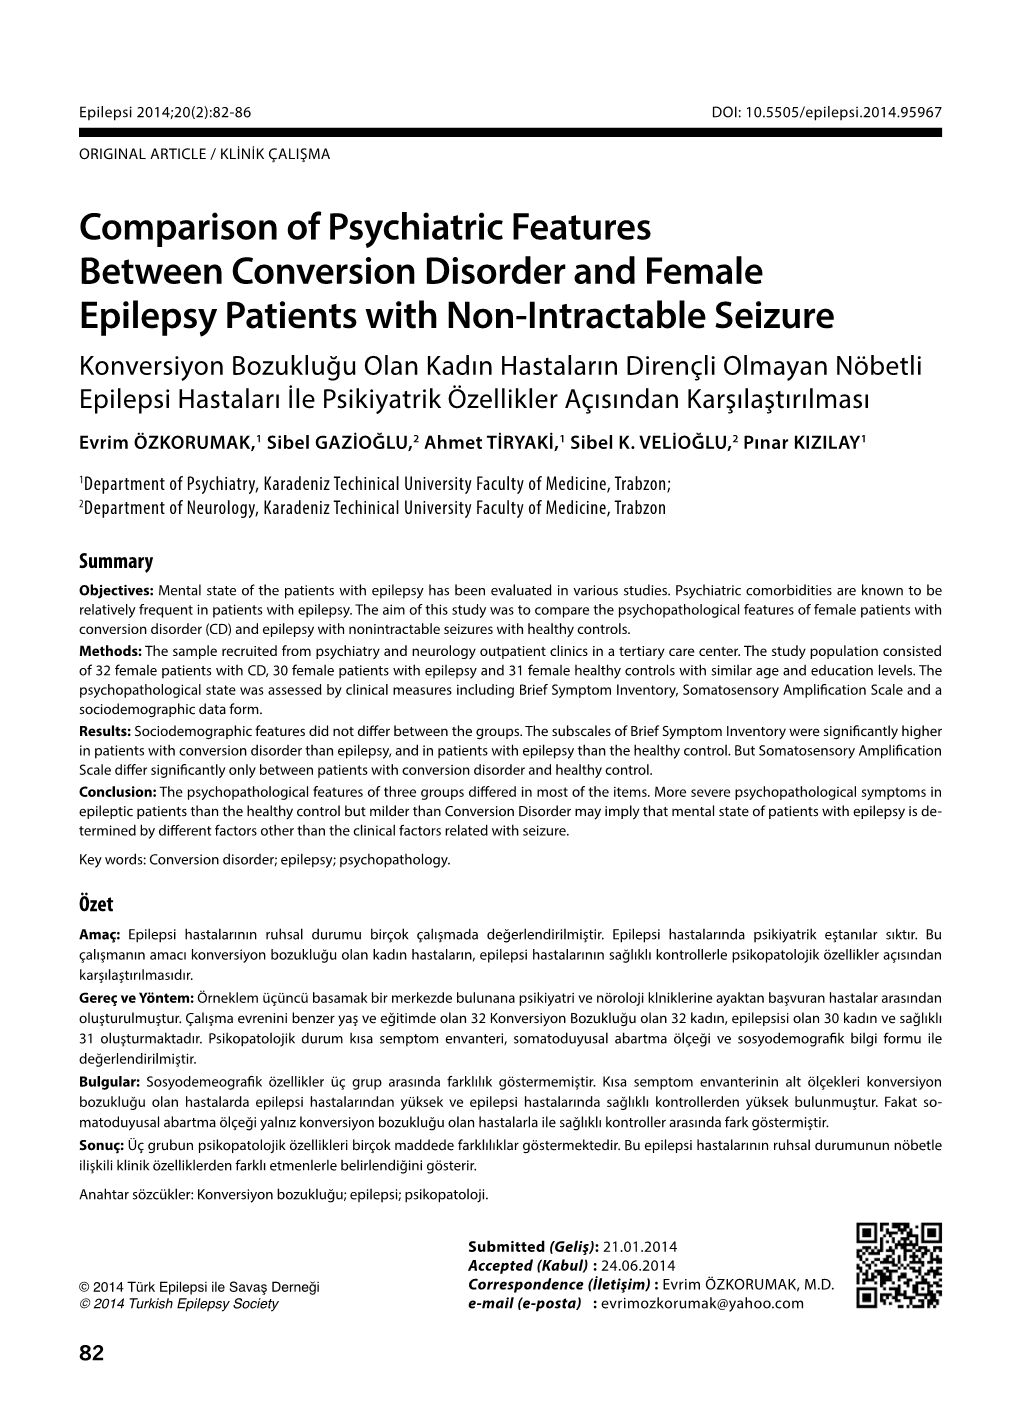 Comparison of Psychiatric Features Between Conversion Disorder And